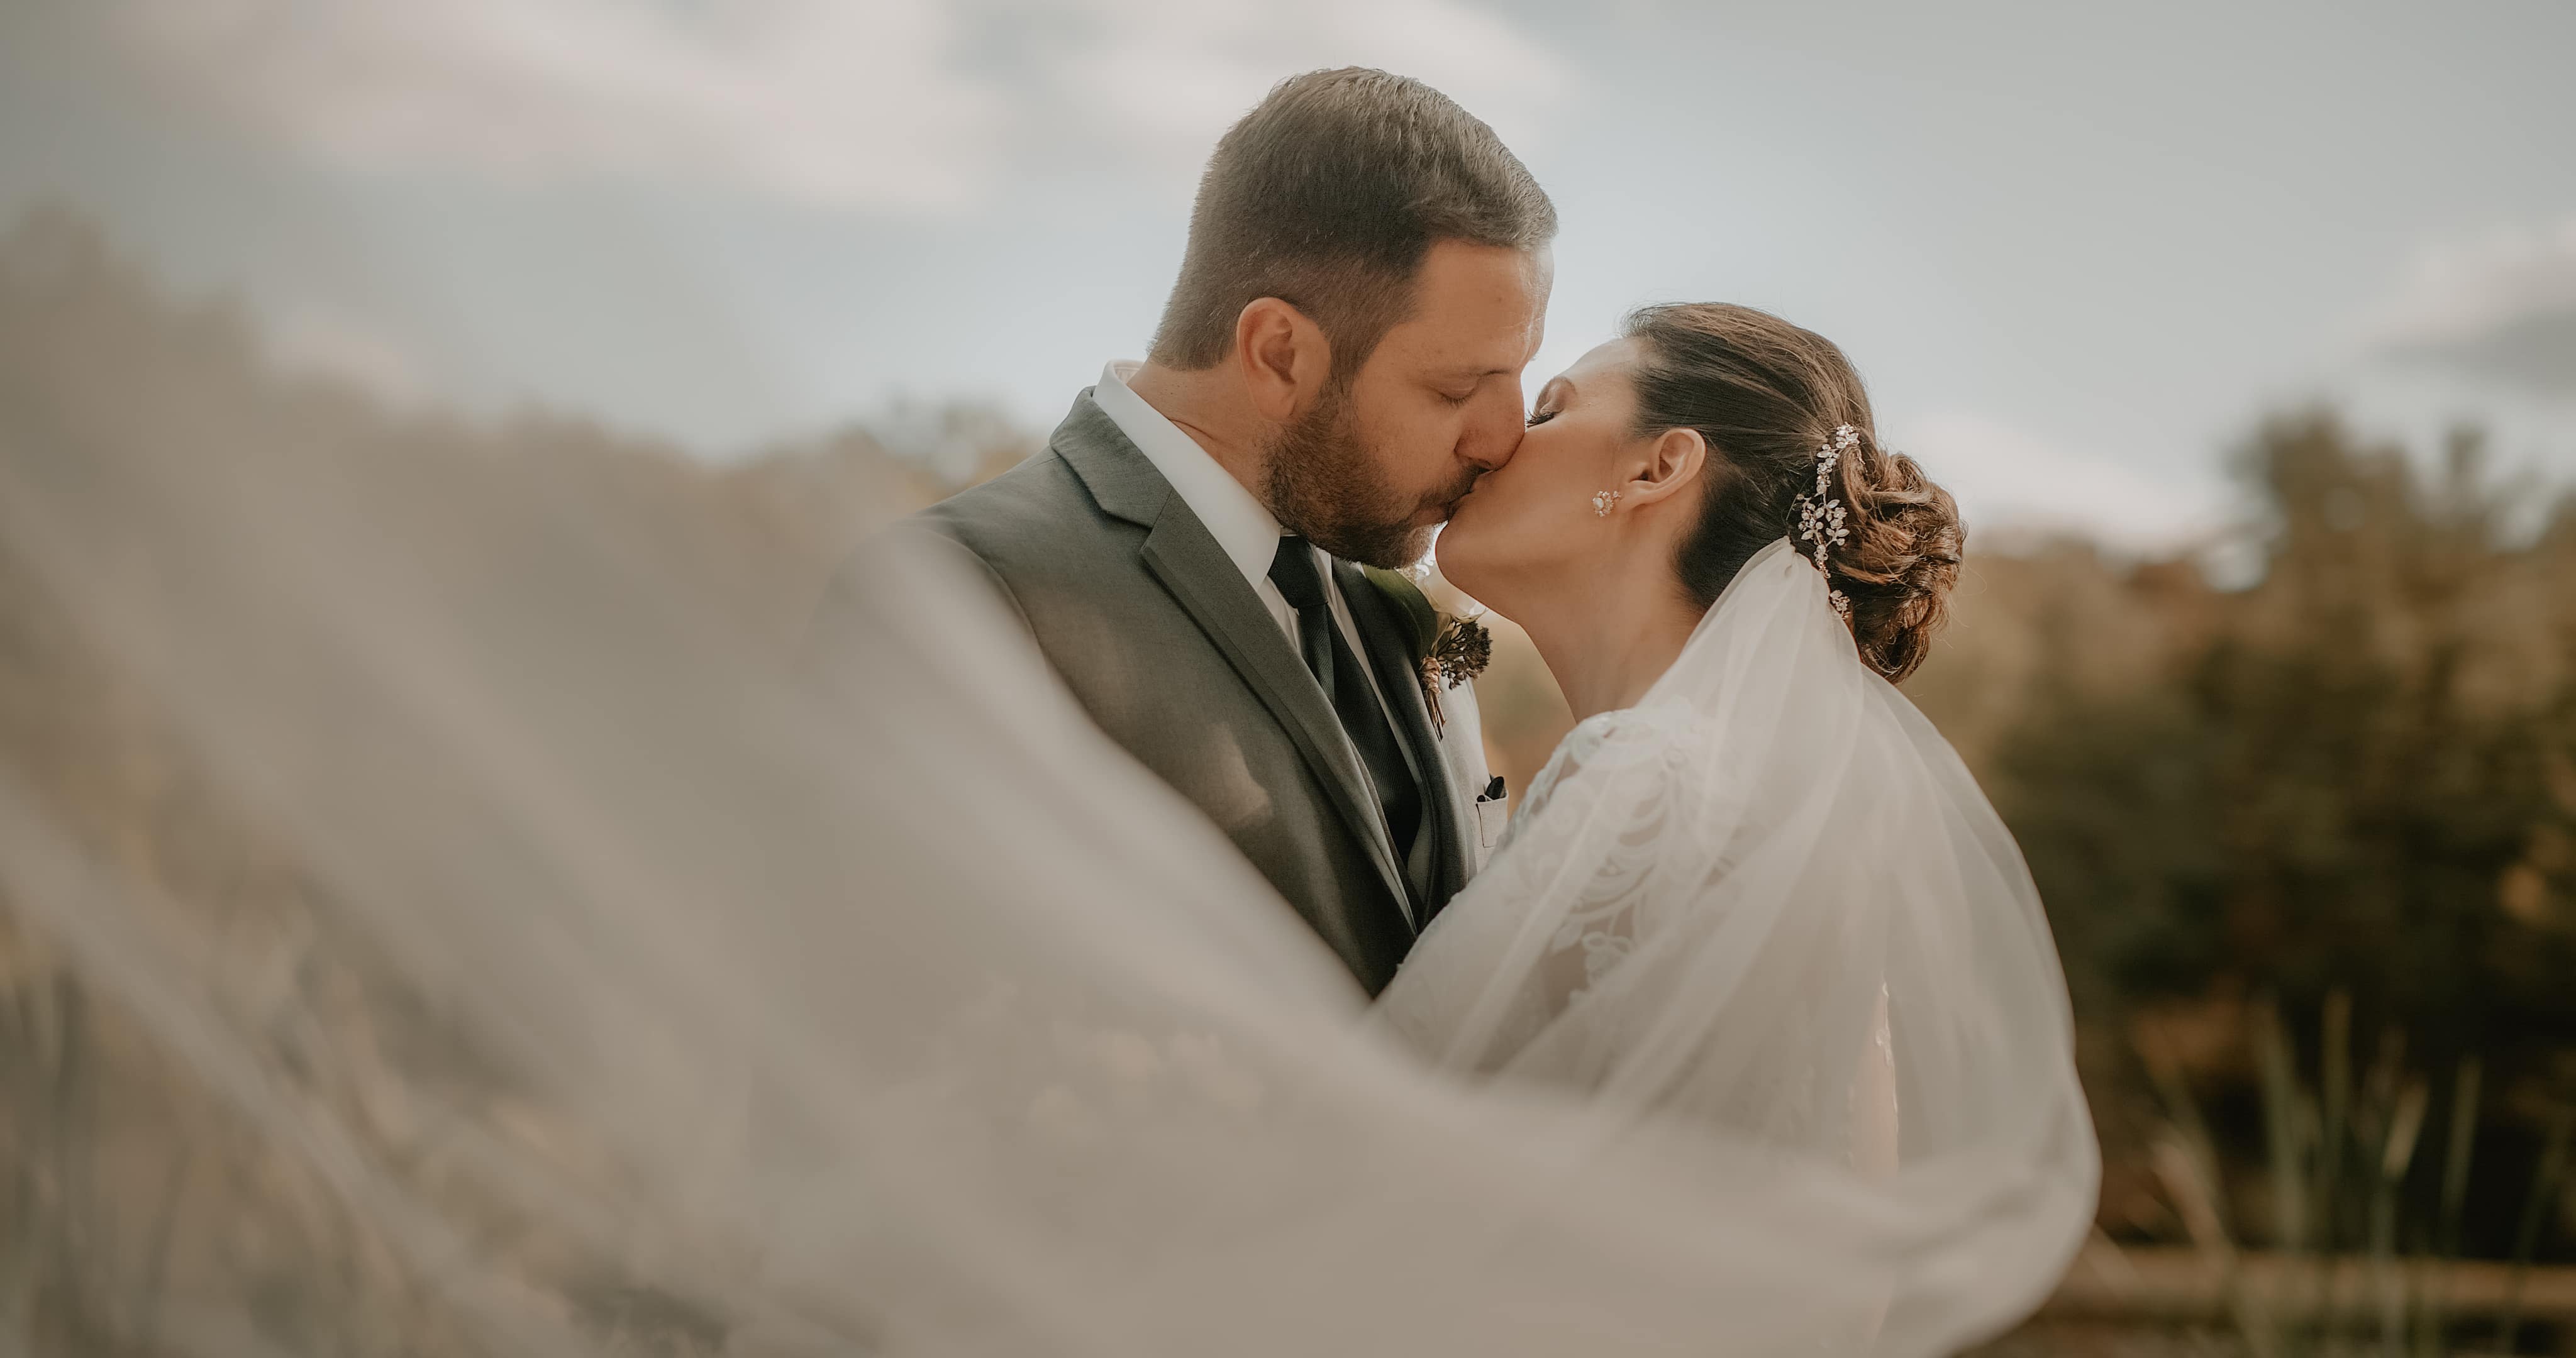 Erin and Nicks Arrow Park Wedding Videography in the Hudson Valley